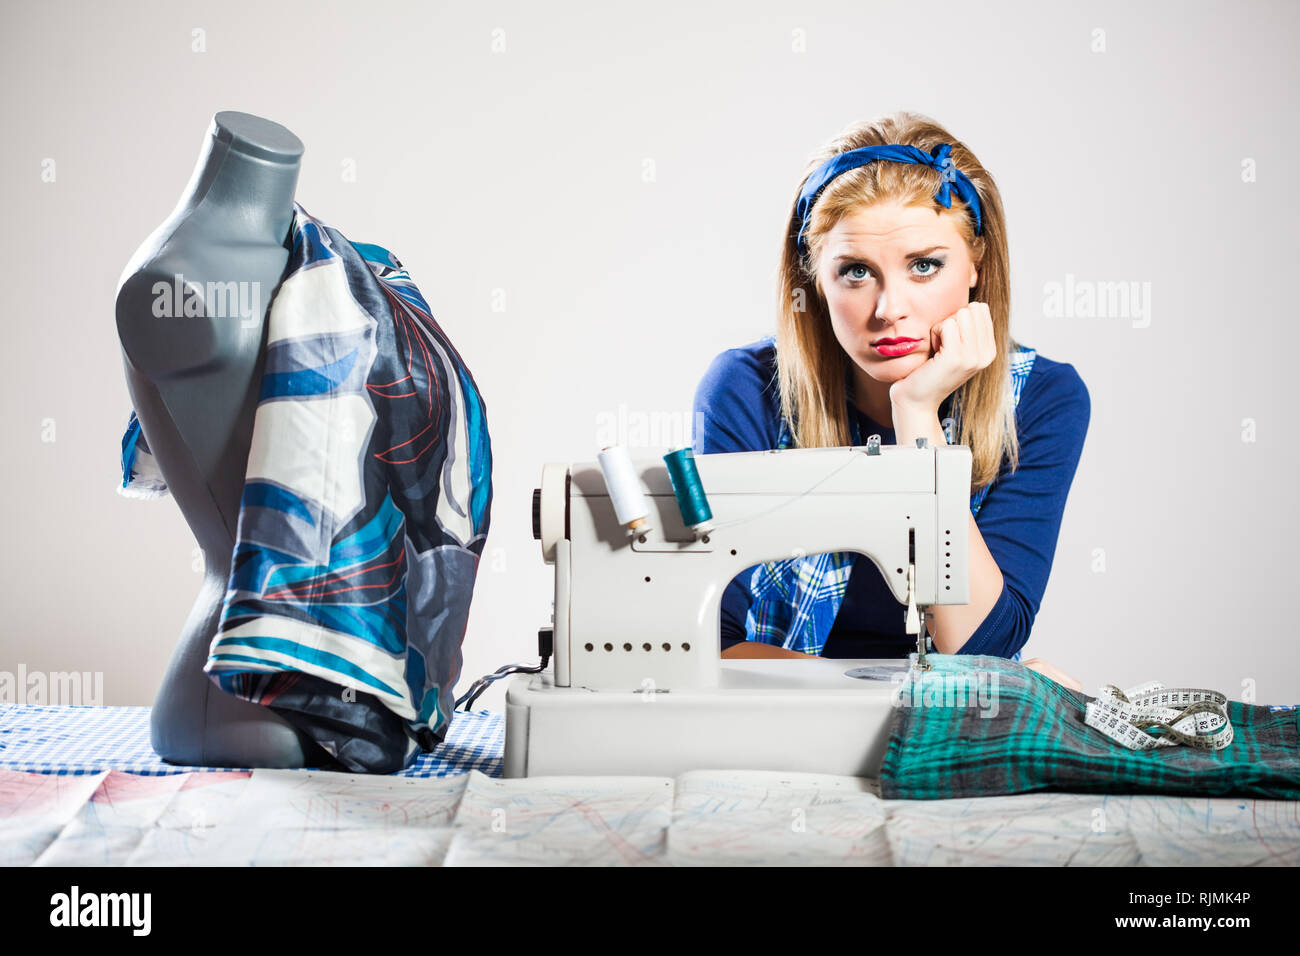 Tailor sews and getting bored Stock Photo